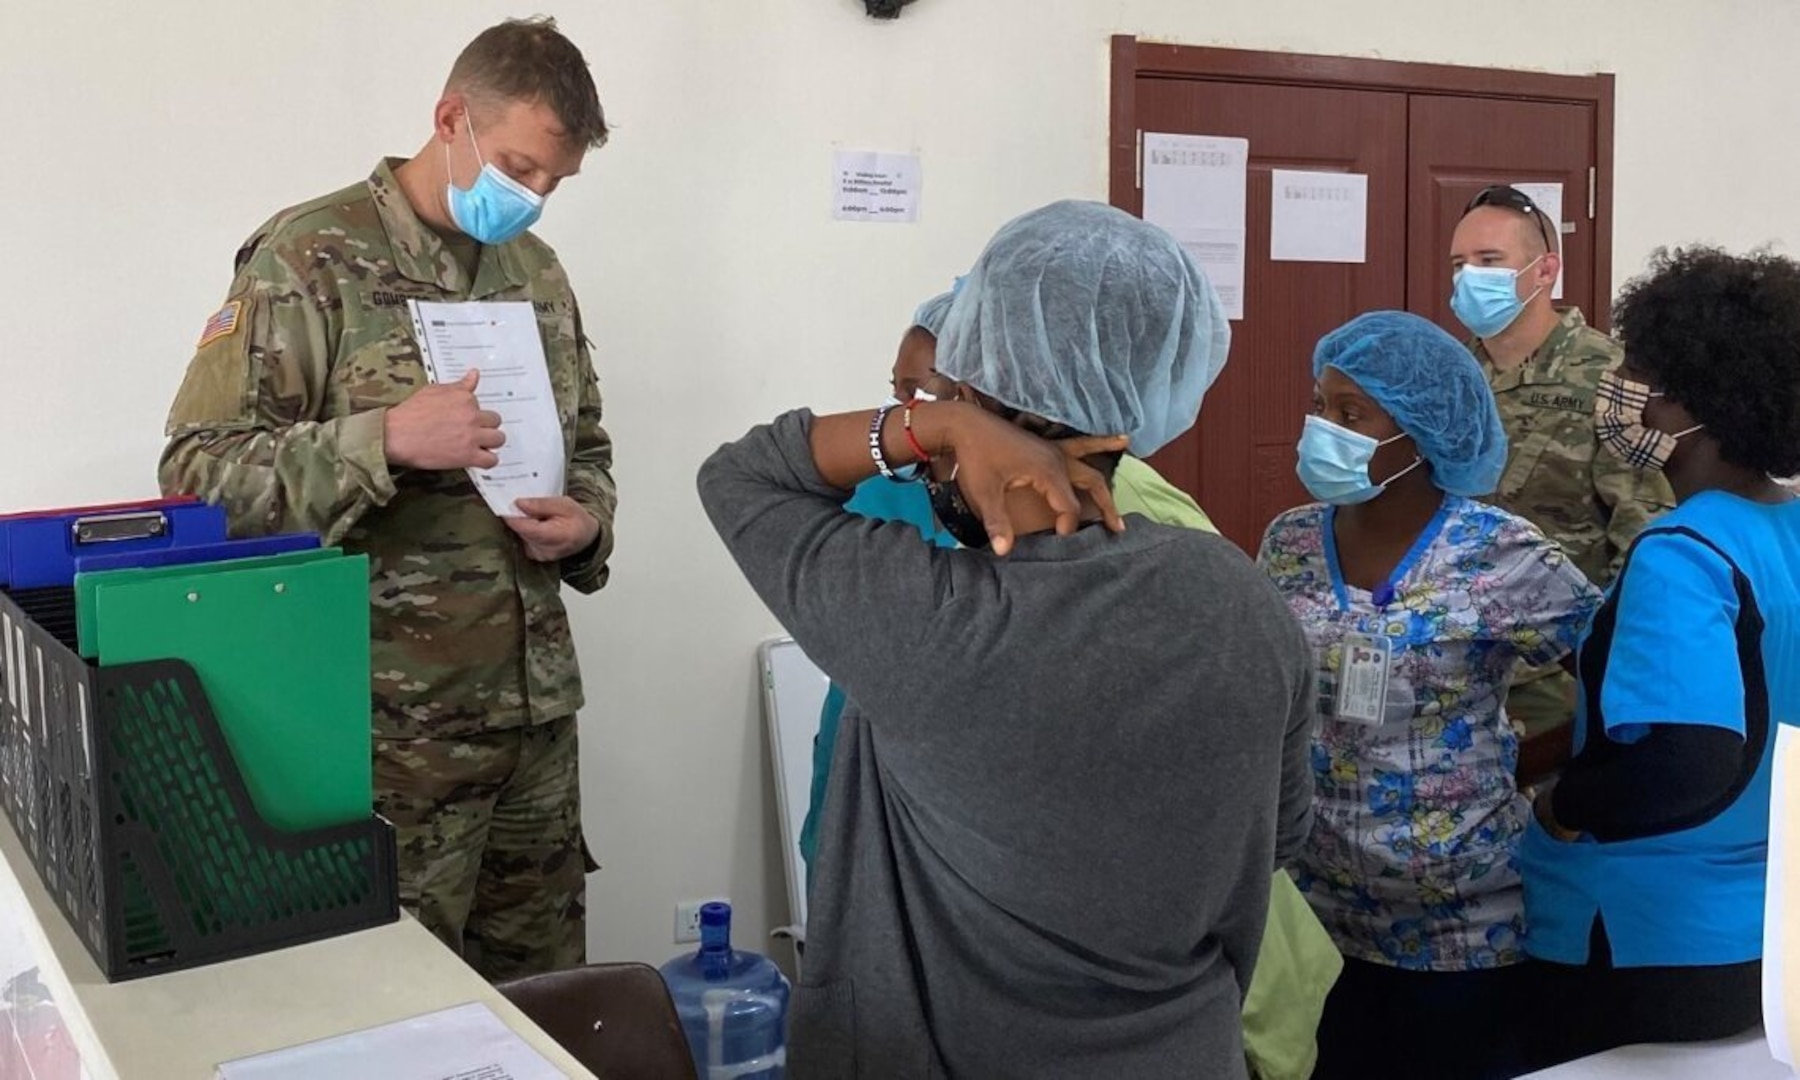 U.S. Soldier Capt. Matthew Gomberg, assigned to the Michigan National Guard, provides emergency medicine mentorship to members of the Armed Forces of Liberia (AFL) at 14 Military Hospital in Latvia.